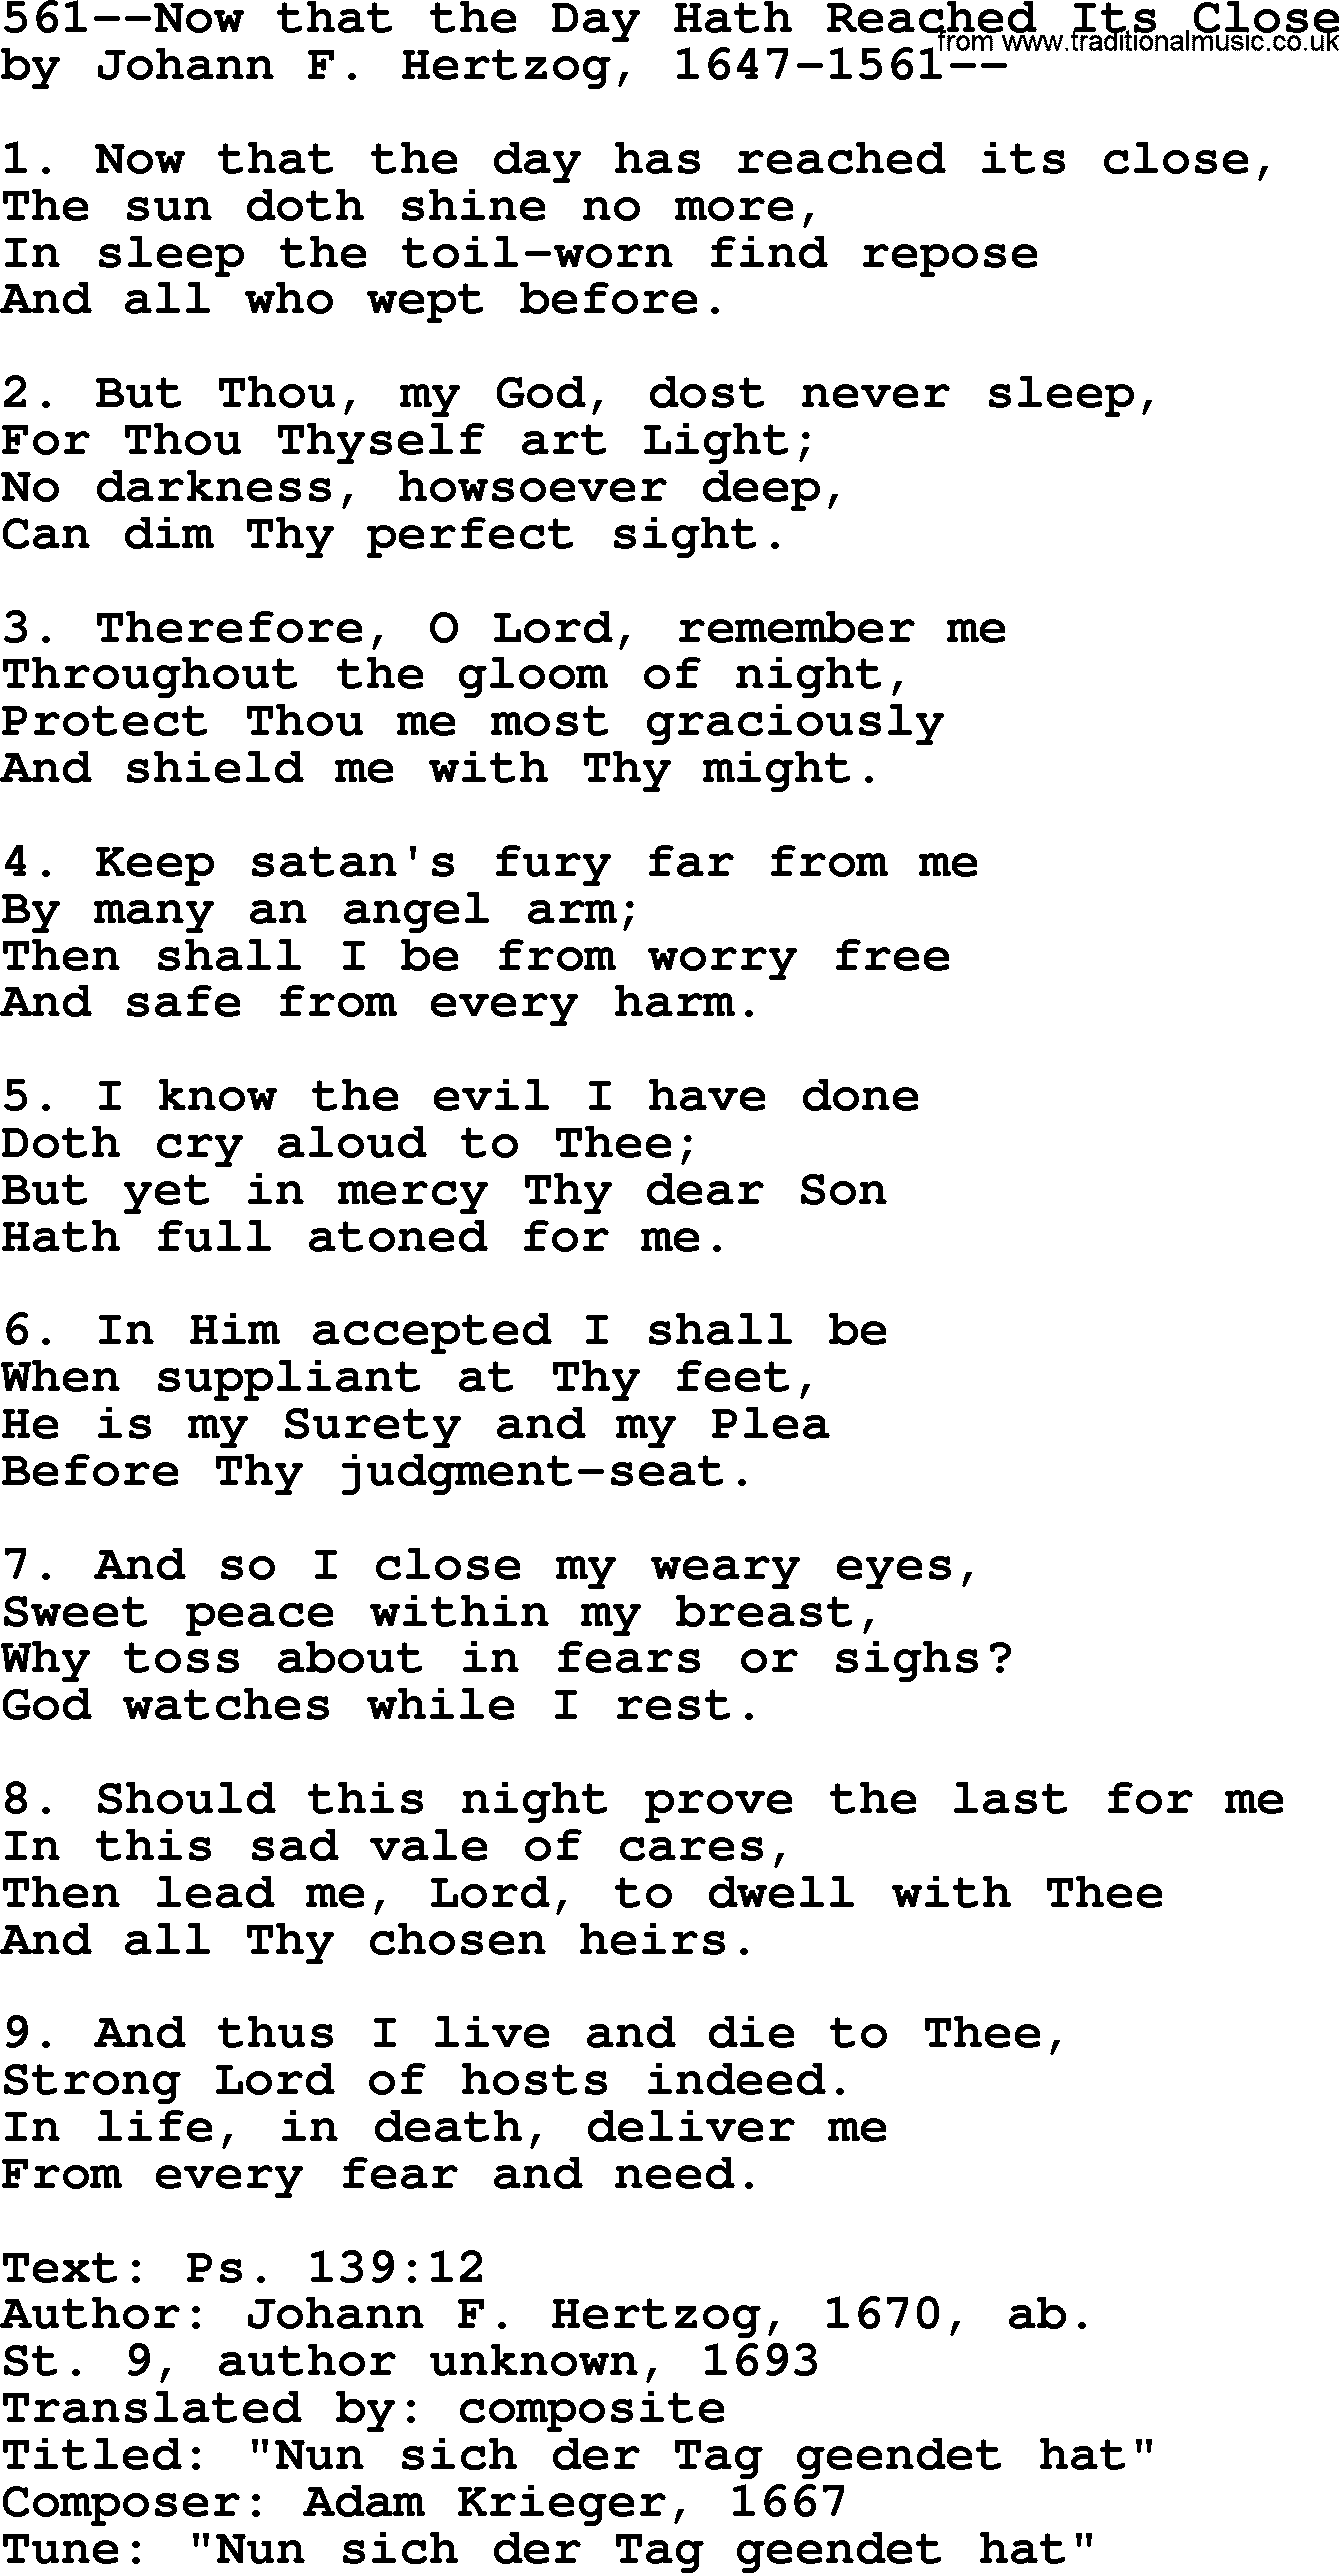 Lutheran Hymn: 561--Now that the Day Hath Reached Its Close.txt lyrics with PDF